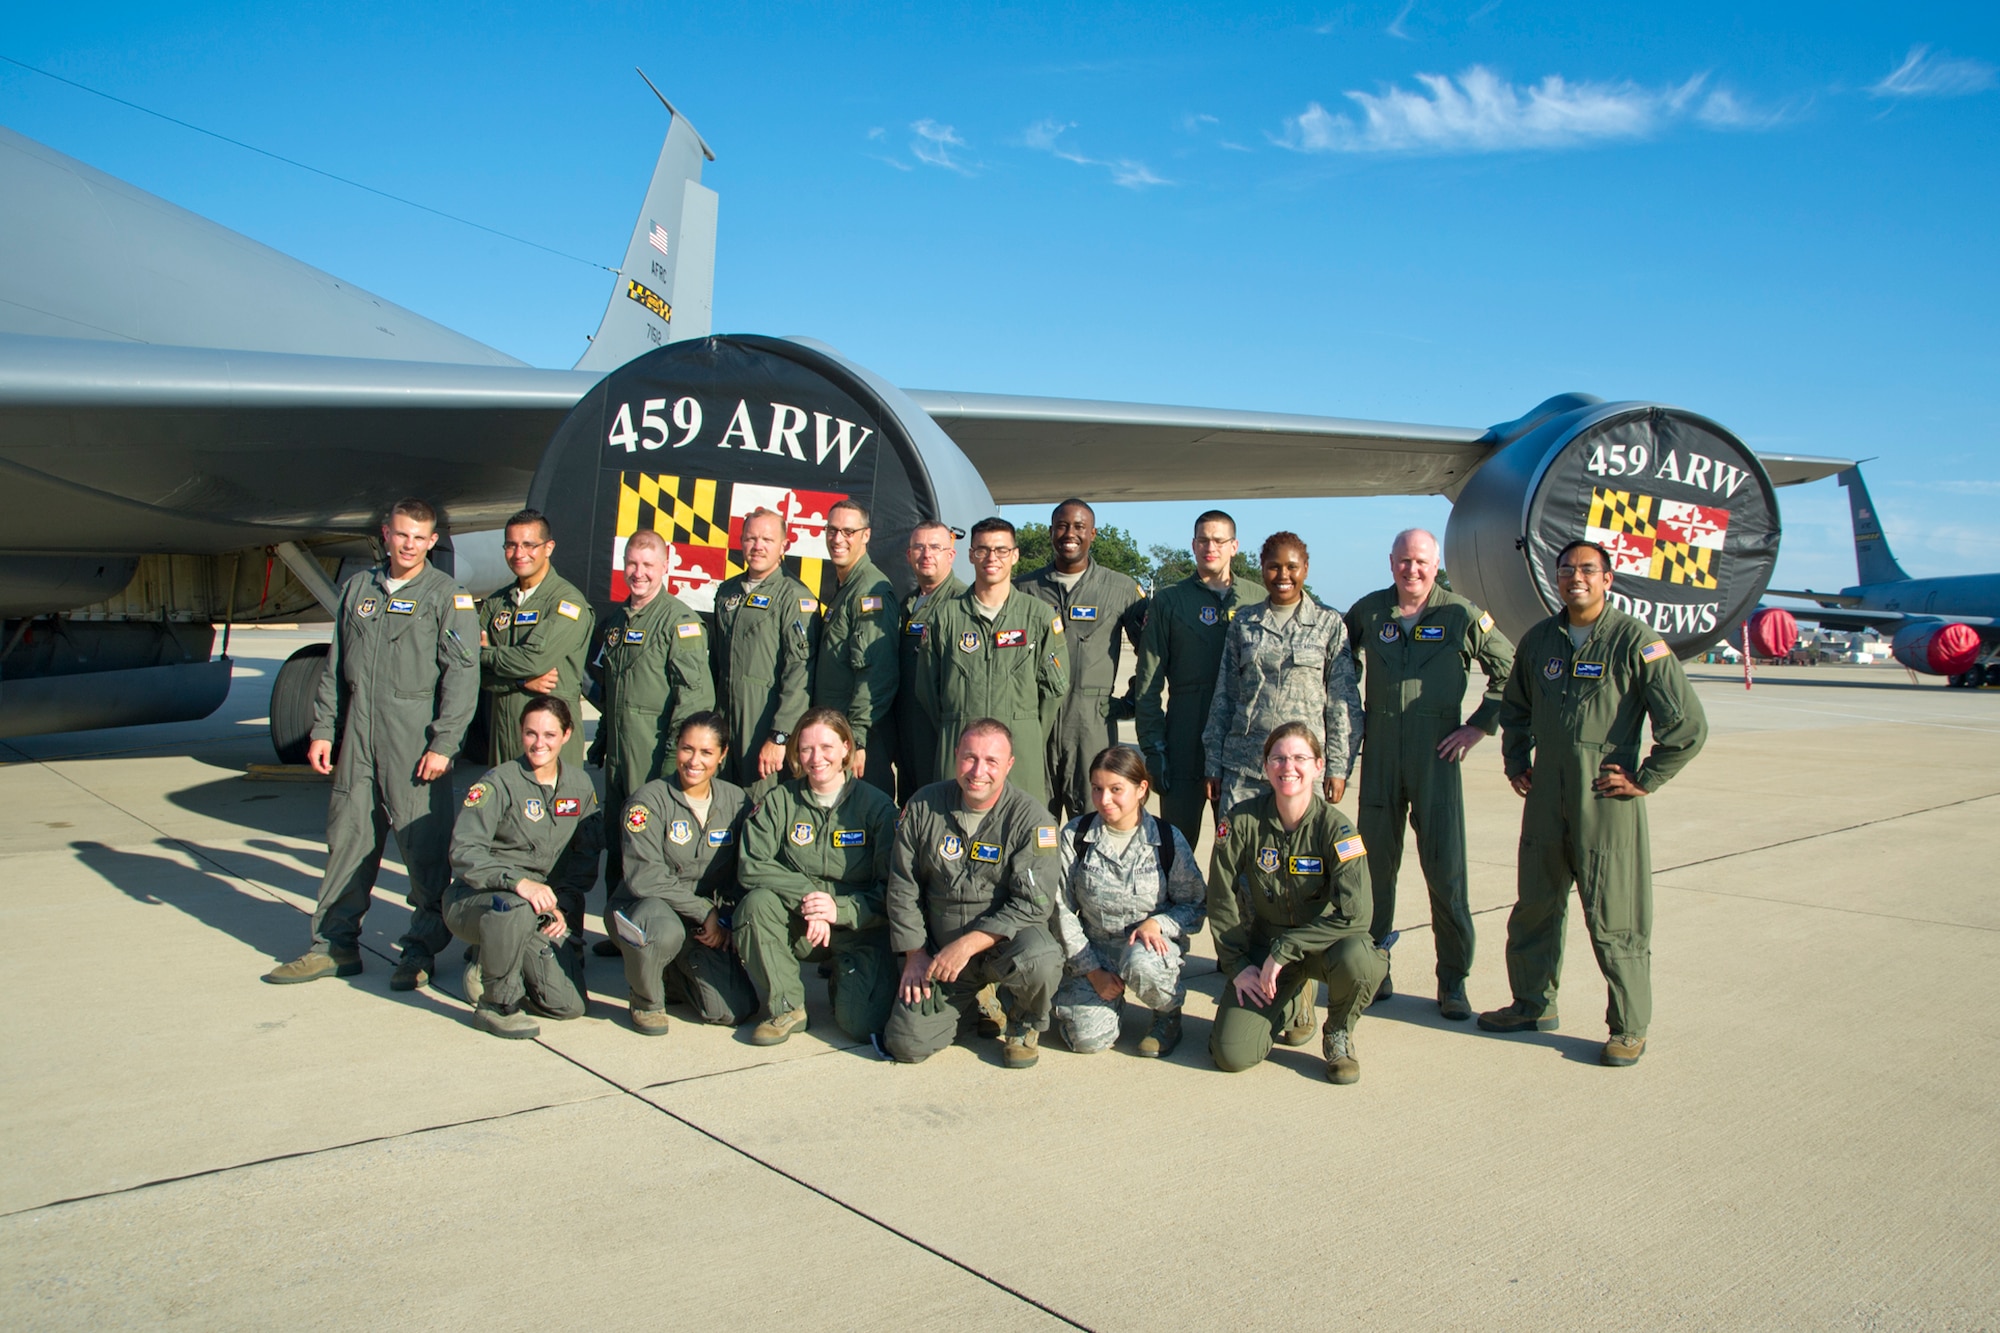 Members of the 459th Aeromedical Evacuation Squadron and 459th Operation Group pose for a group photo on the Joint Base Andrews, Maryland, flight line Sunday, Aug. 28, 2016, upon return from joint-unit, multi-aircraft training at Peterson Air Force Base, Colorado. More than a dozen AES flight nurses, technicians and administrators flew to Peterson to conduct joint unit training with other AE squadrons on board the KC-135R Stratotanker, C-17 Globemaster III and C-130H3 Hercules. Serving as a medical transport unit, the 459th AES trained for various medical conditions and situations. (U.S. Air Force photo/Staff Sgt. Kat Justen)